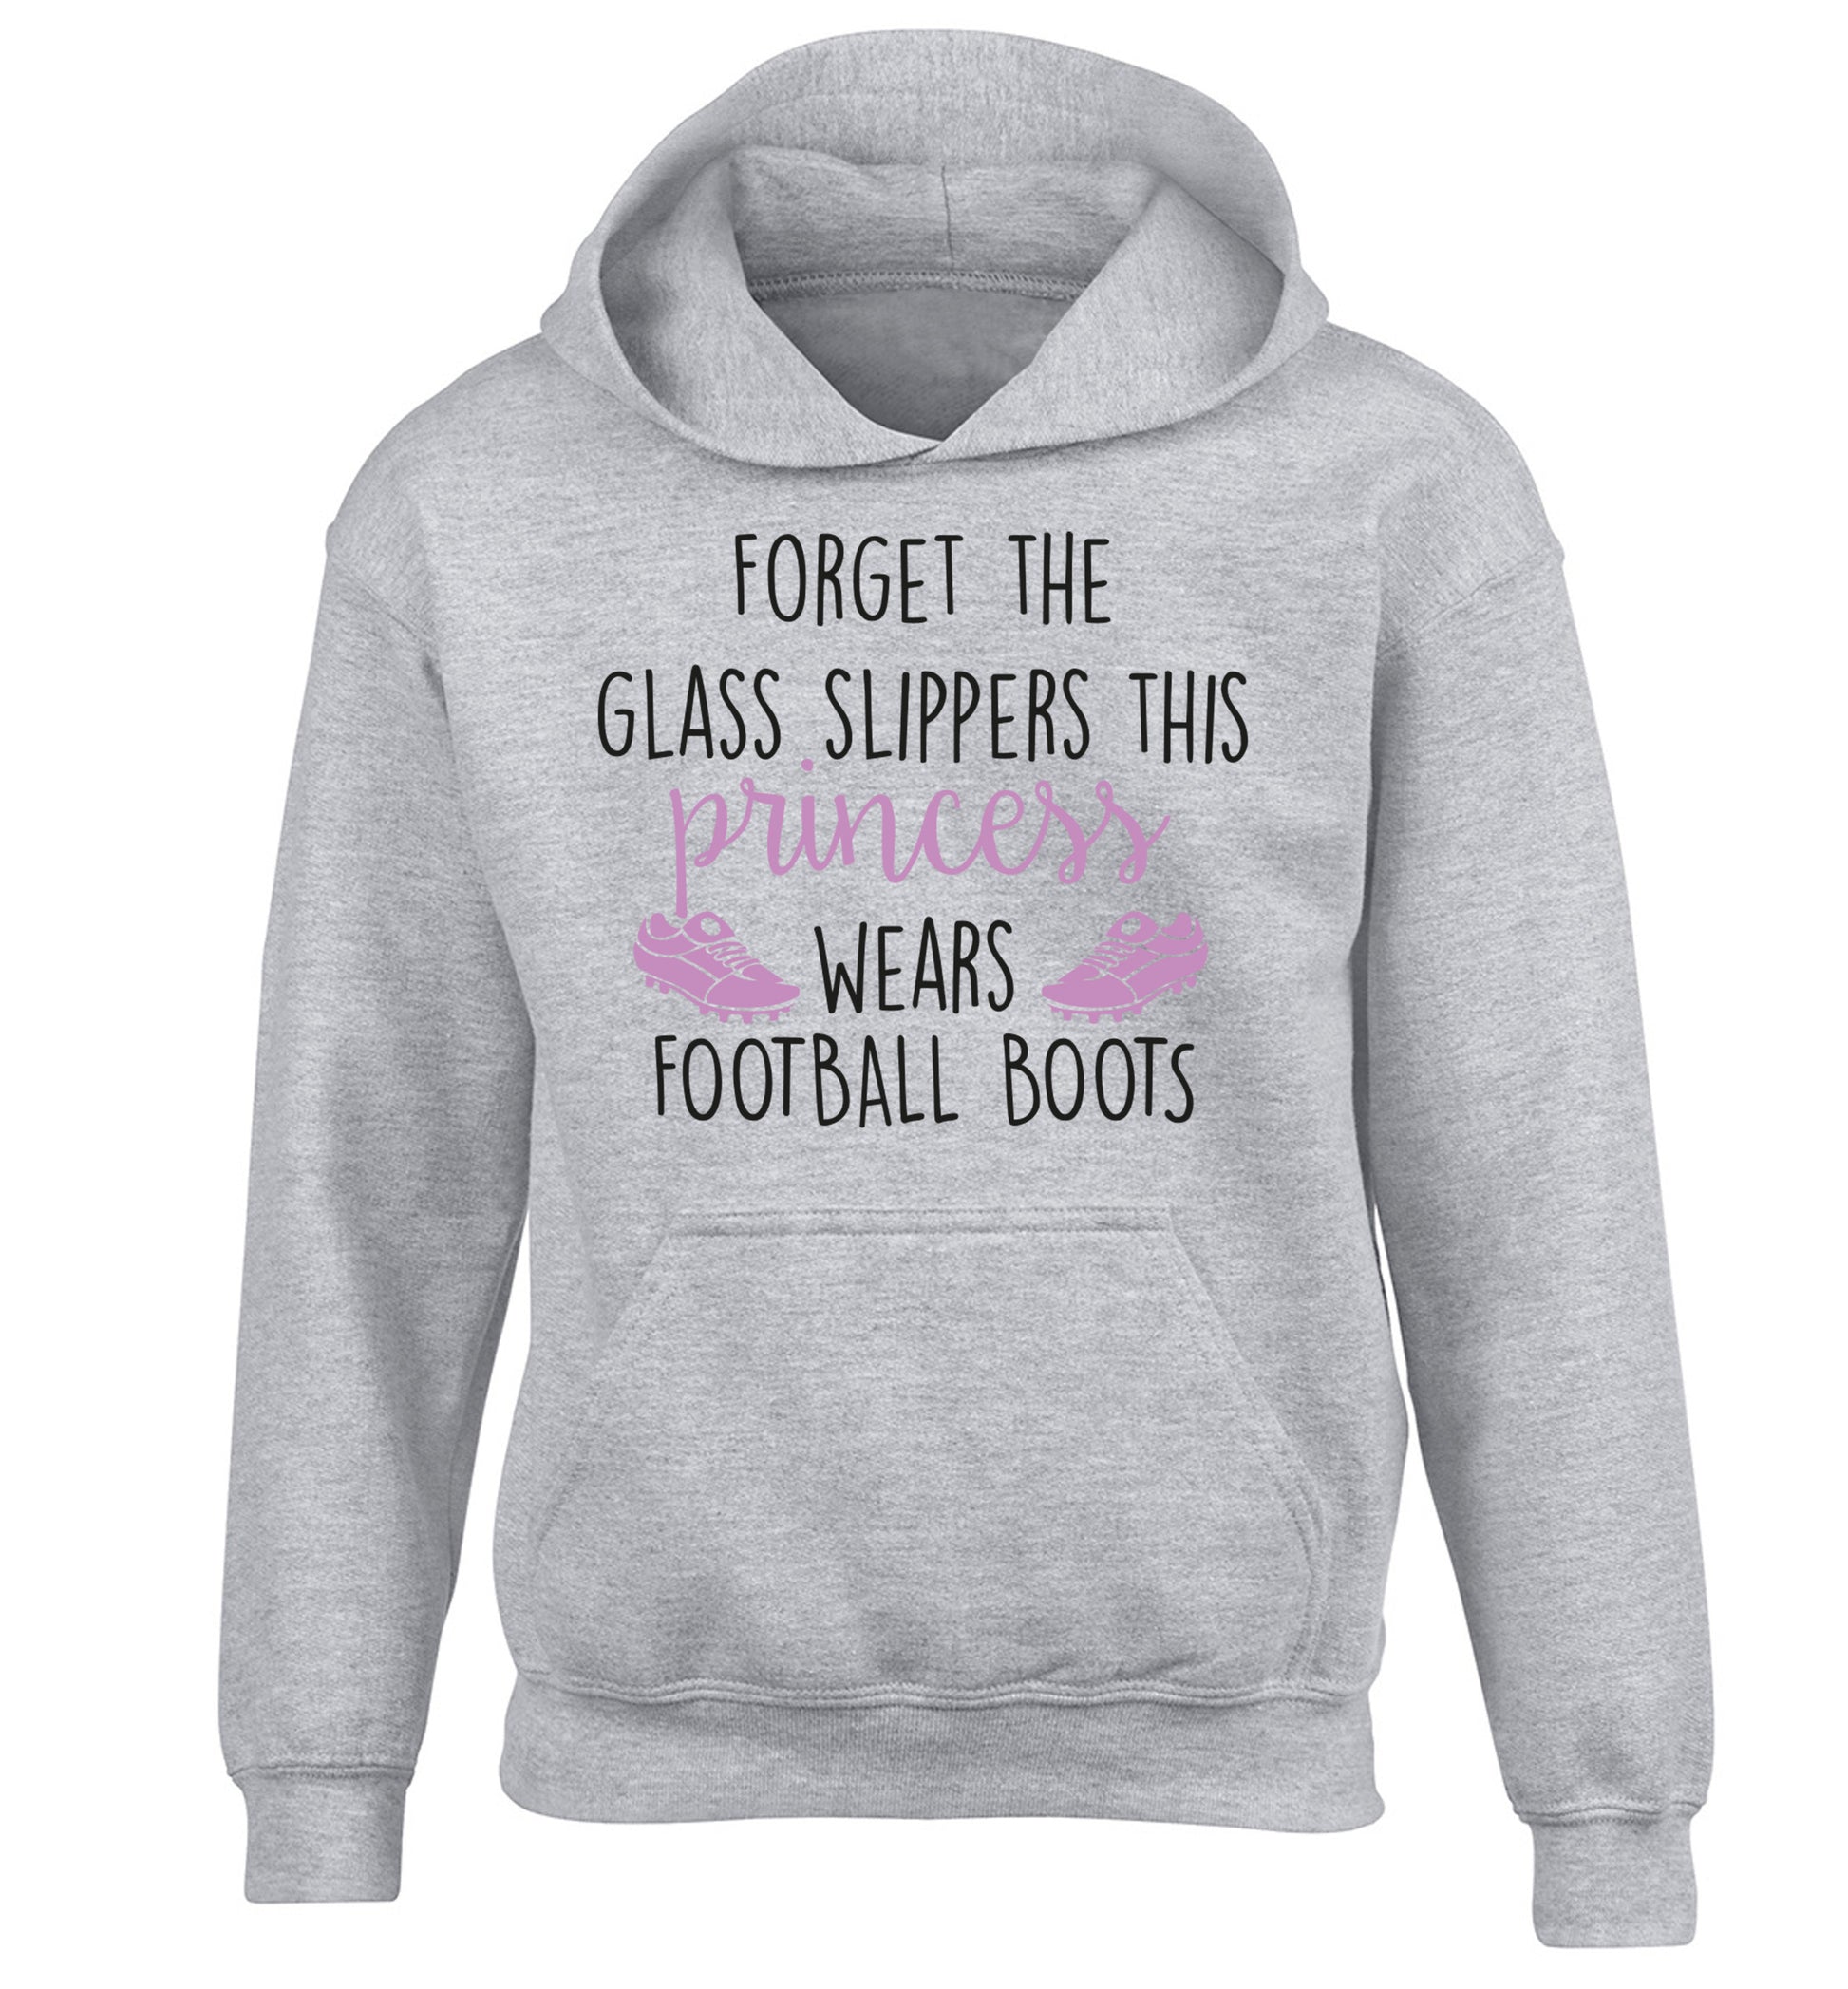 Forget the glass slippers this princess wears football boots children's grey hoodie 12-14 Years